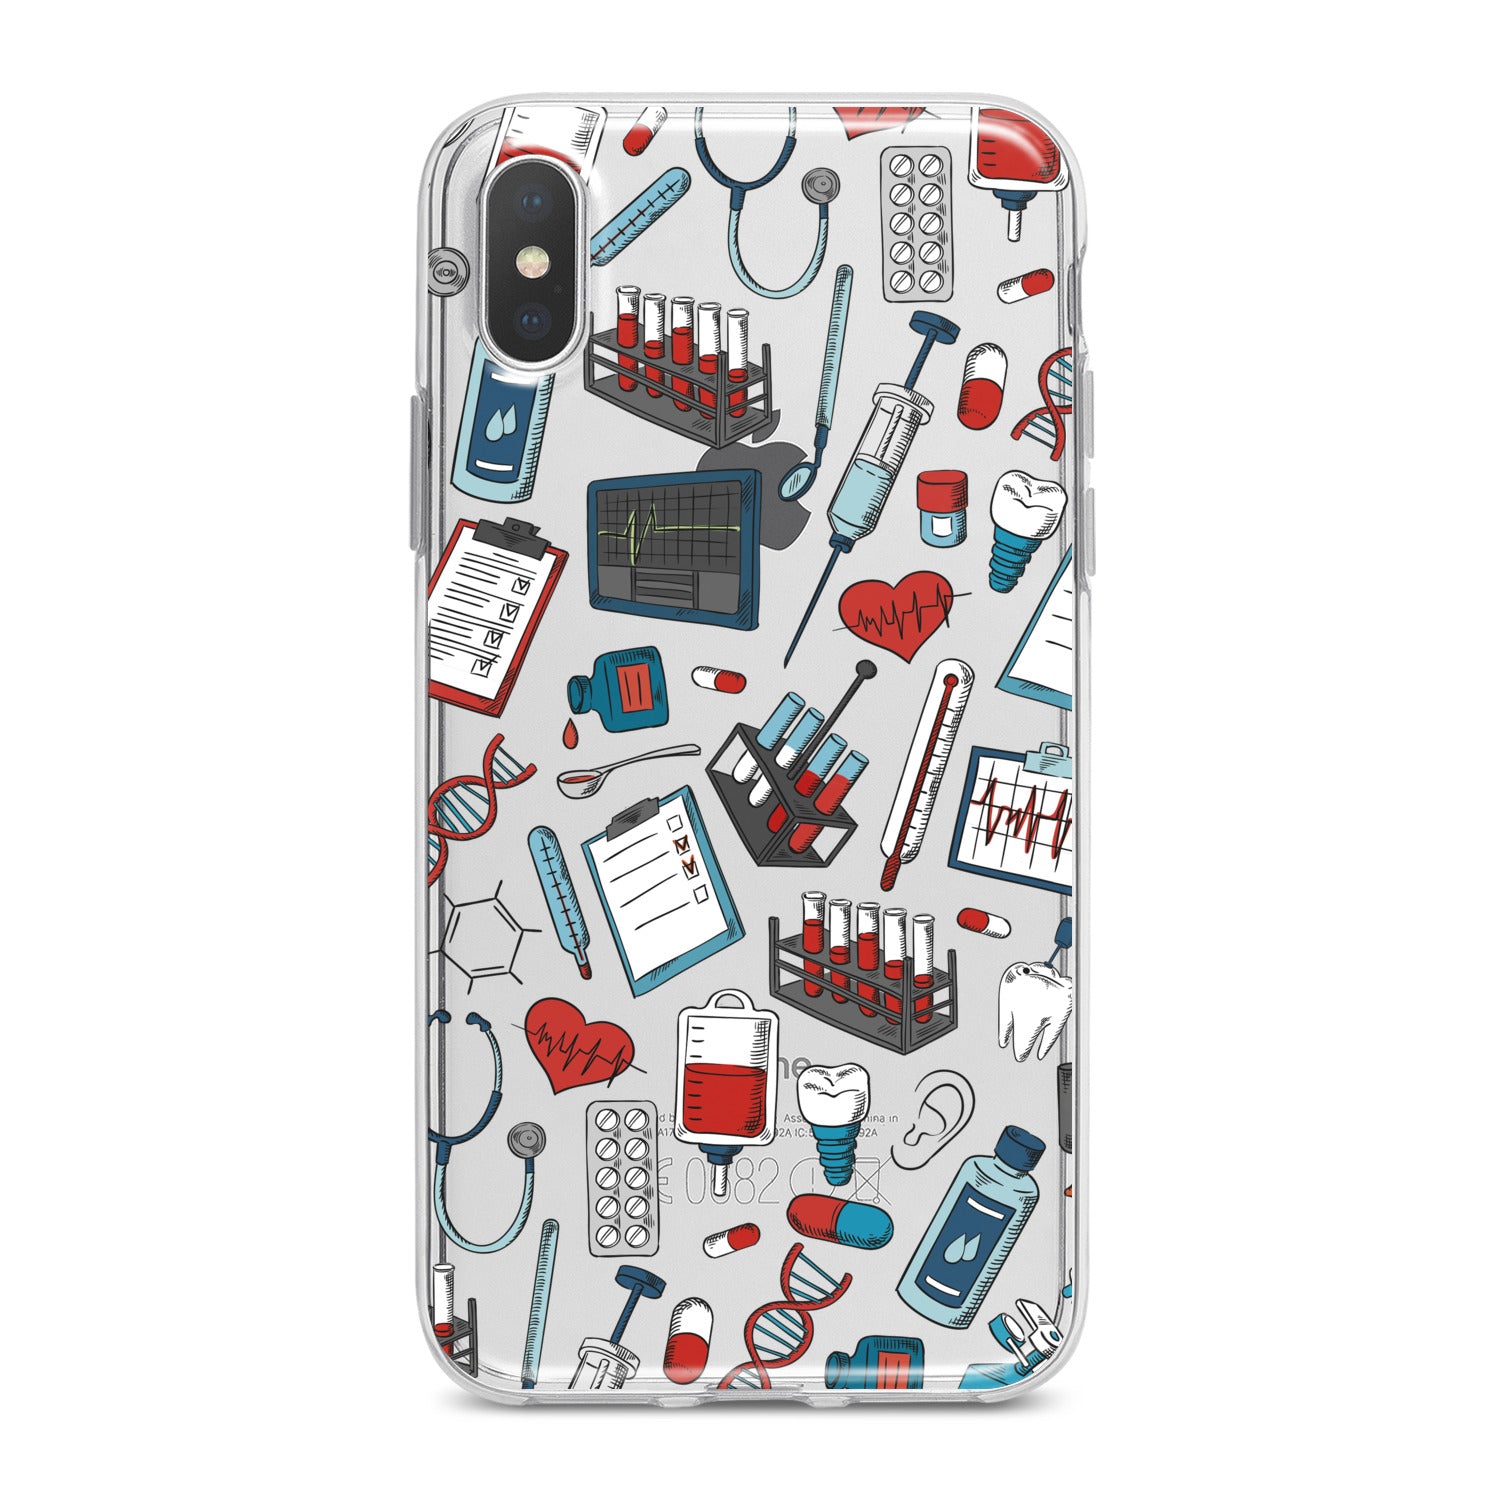 Lex Altern Medical Pattern Phone Case for your iPhone & Android phone.